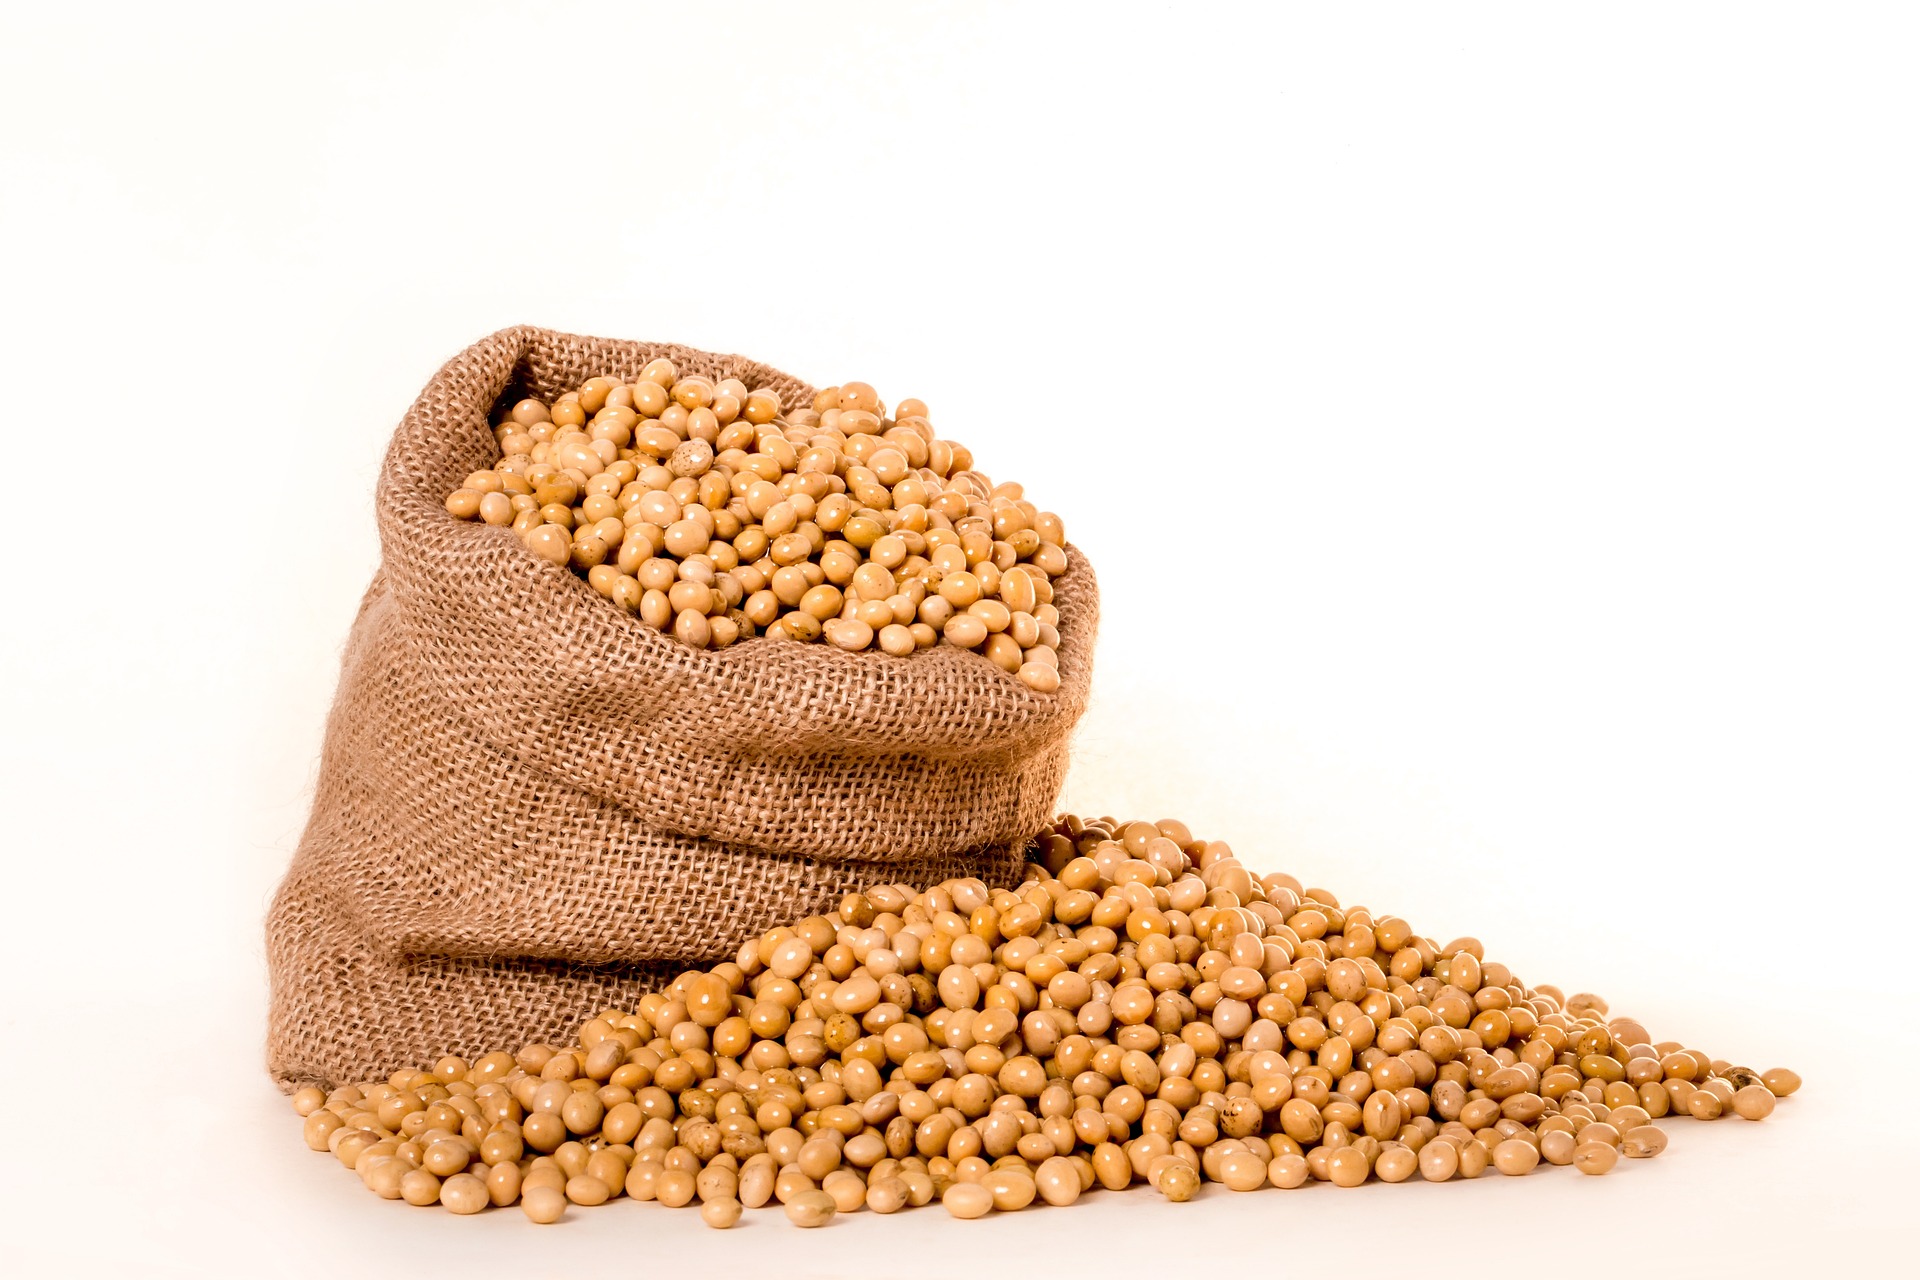 From Reducing Gut Inflammation To Mitigating Colorectal Cancer, Know Health Benefits Of Soybean